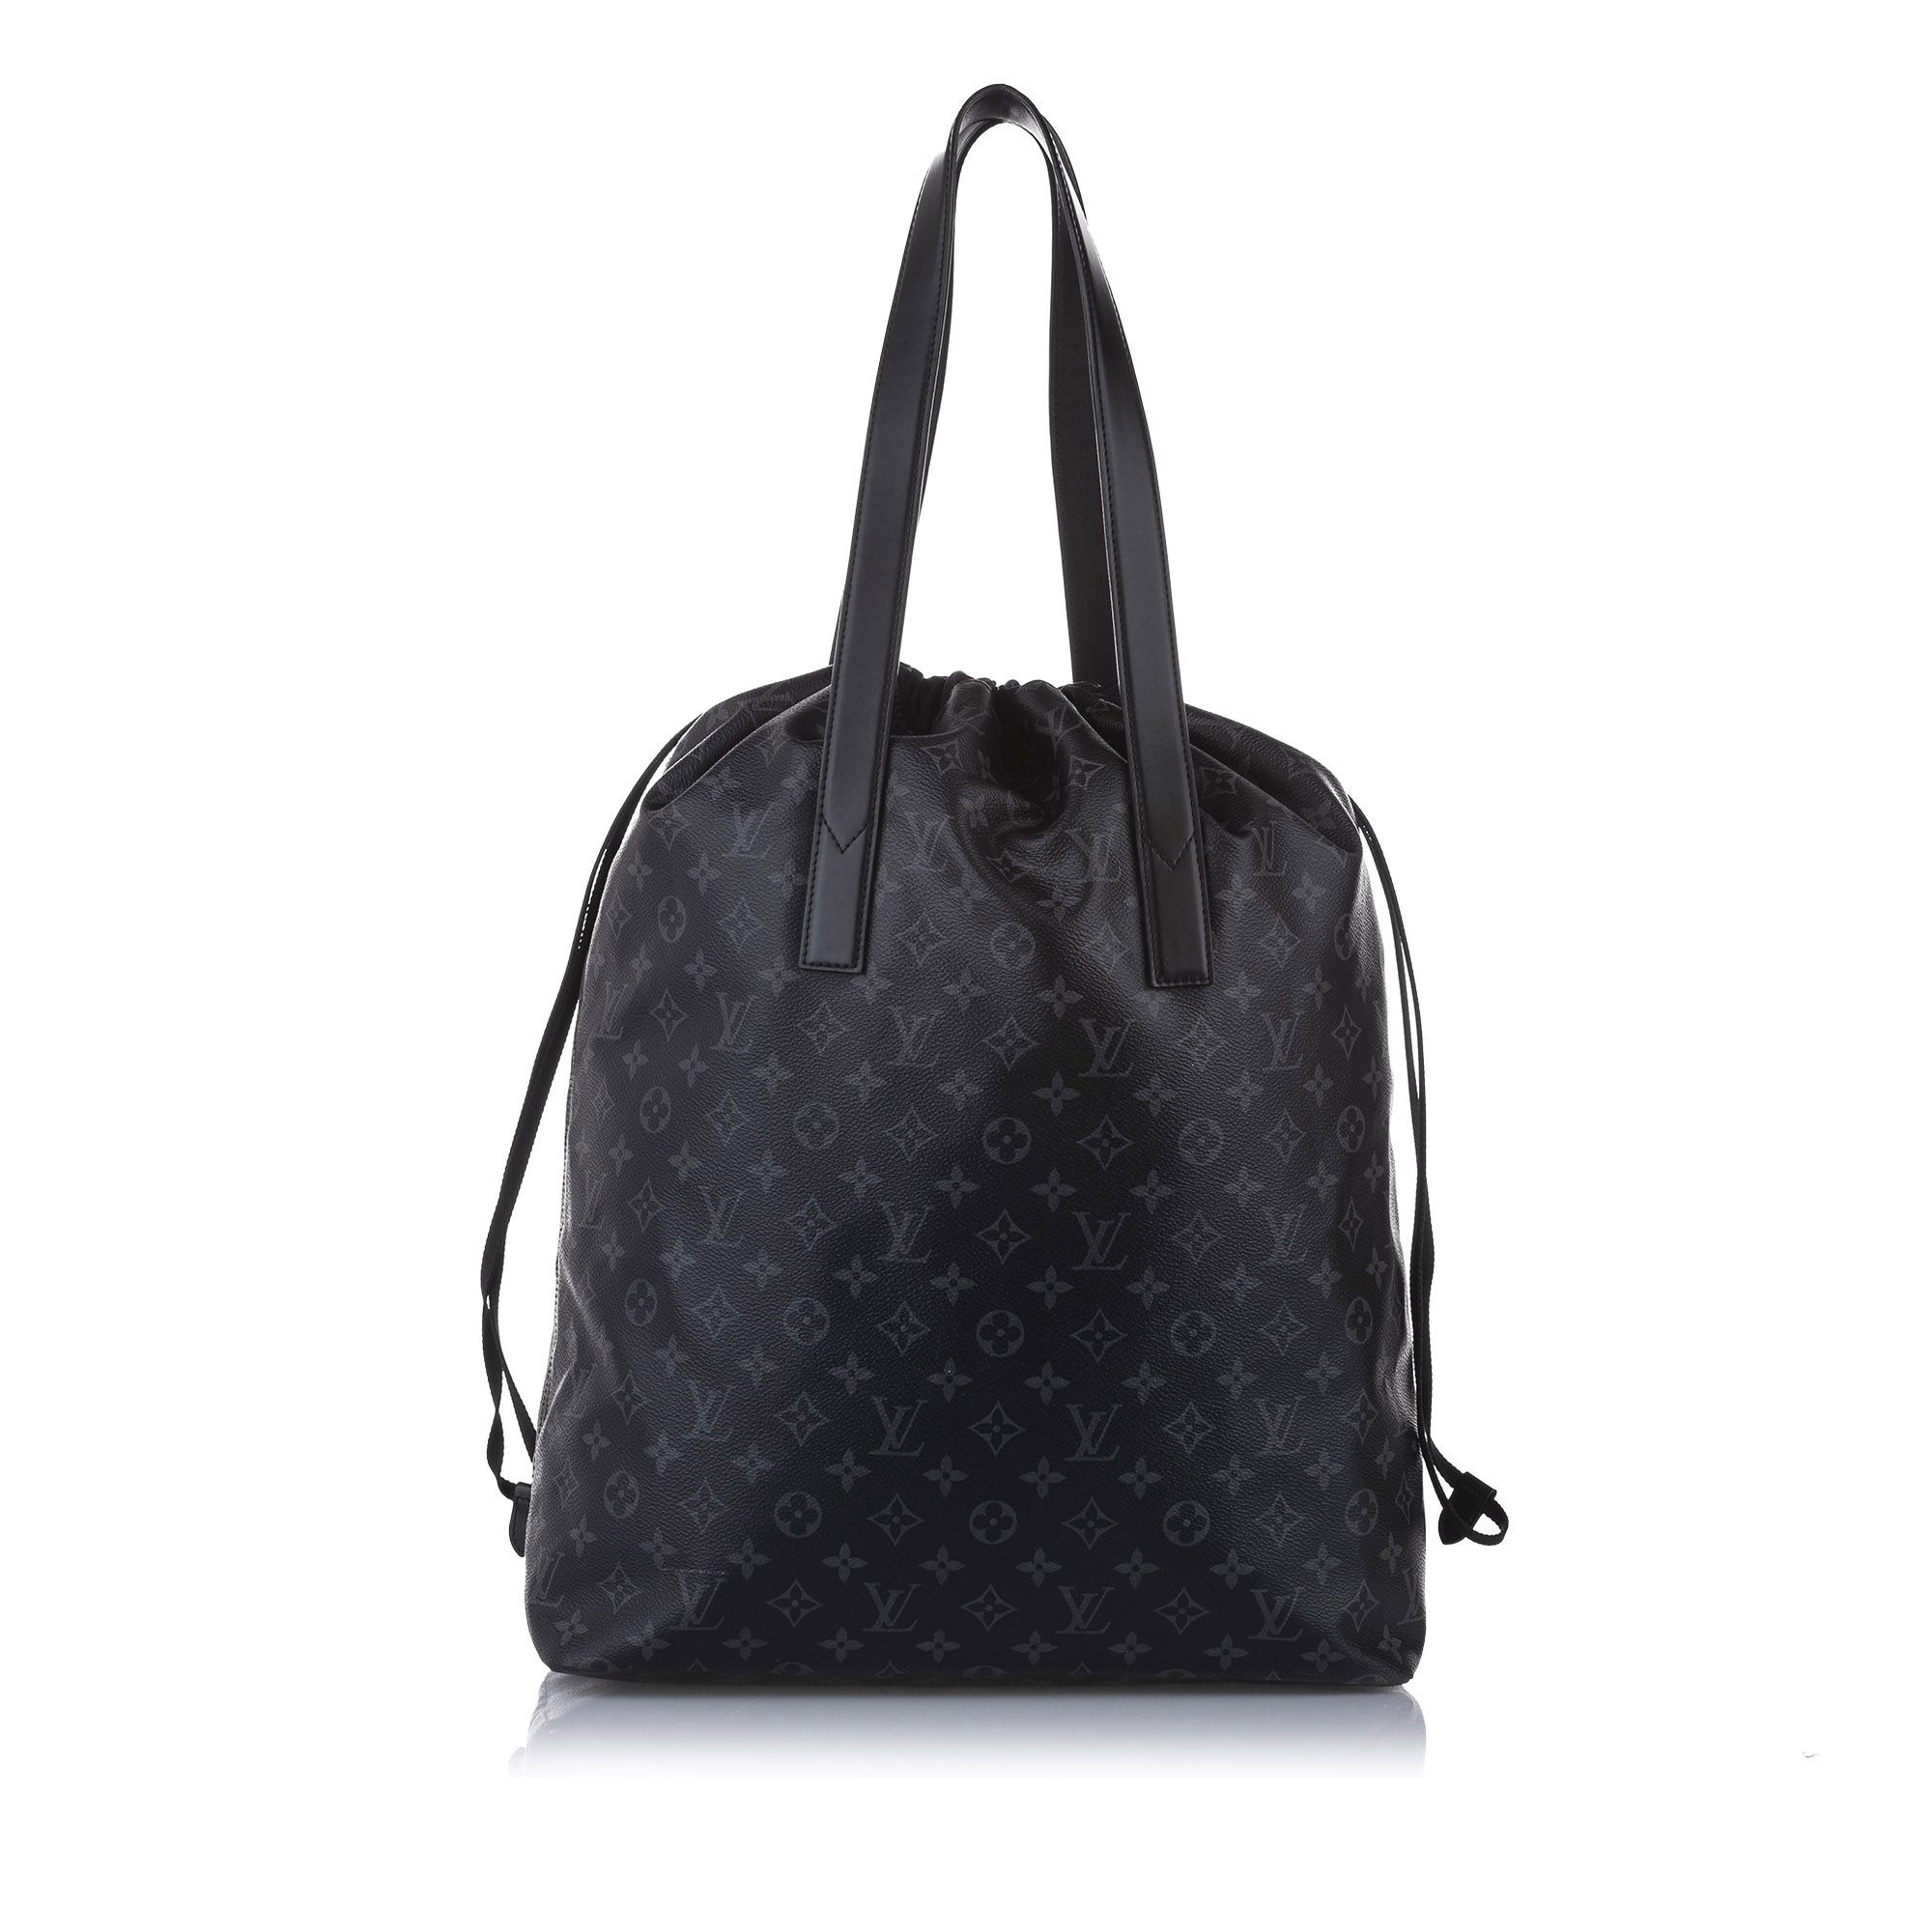 VINTAGE. RRP AS NEW. The Monogram Eclipse Cabas Light features a monogram canvas body, and a top drawstring closure.

Dimensions:
Length 50cm
Width 36cm
Depth 15cm
Hand Drop 20cm
Shoulder Drop 20cm

Original Accessories: Pouch, Dust Bag, Box

Serial Number: GI2158
Color: Black
Material: Canvas x Monogram Canvas
Country of Origin: SPAIN
Boutique Reference: SSU165453K1342


Product Rating: VeryGoodCondition

Certificate of Authenticity is available upon request with no extra fee required. Please contact our customer service team.